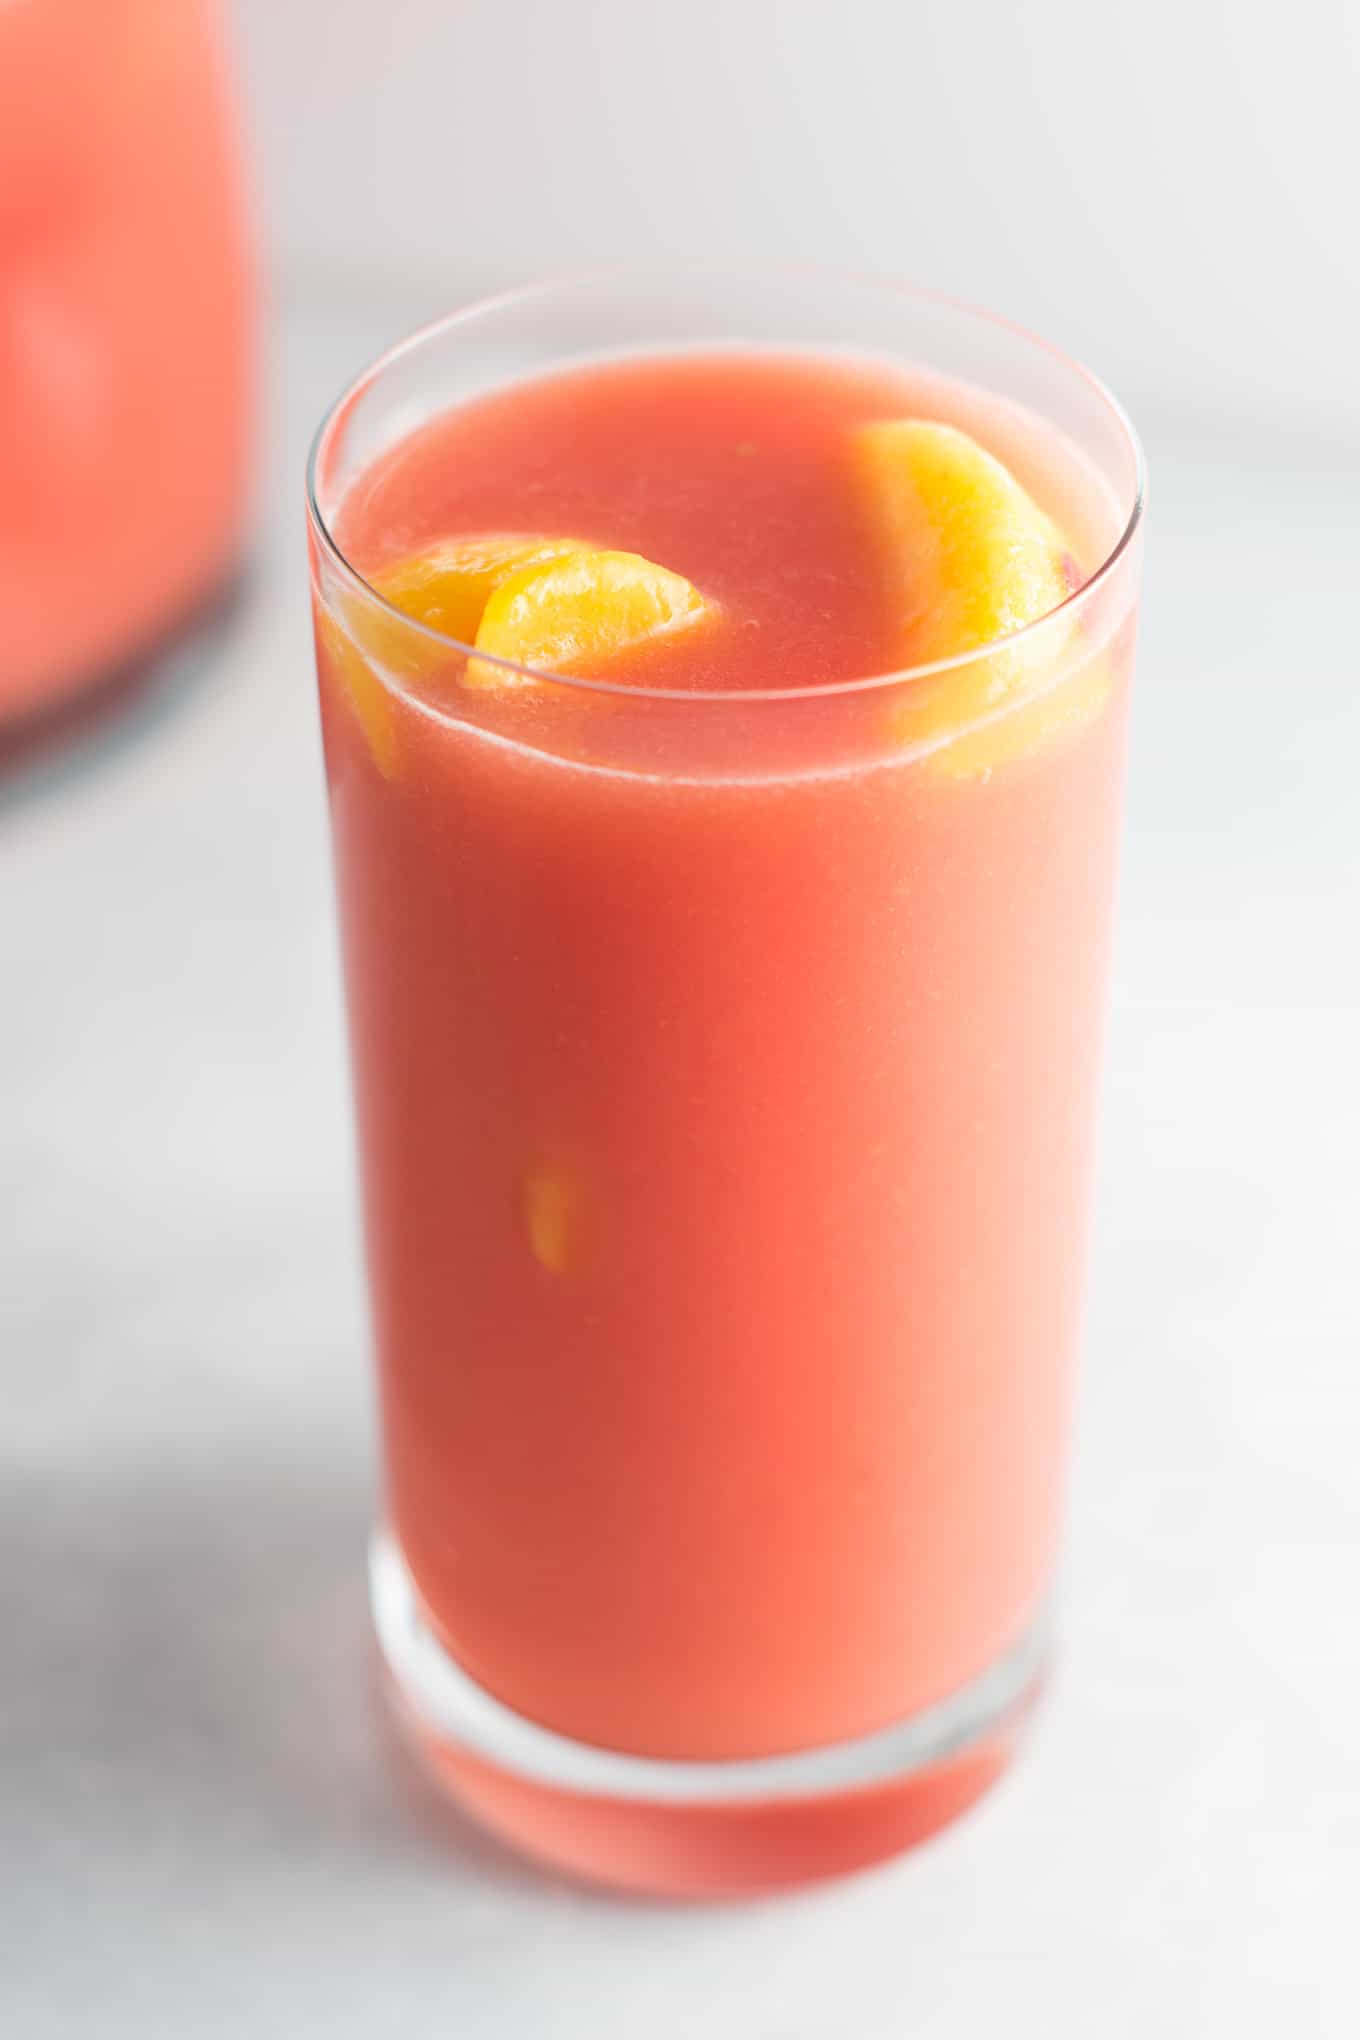 Fresh raspberry peach lemonade recipe made with lemons, raspberries, peaches, water, and maple syrup. Naturally sweetened and delicious!